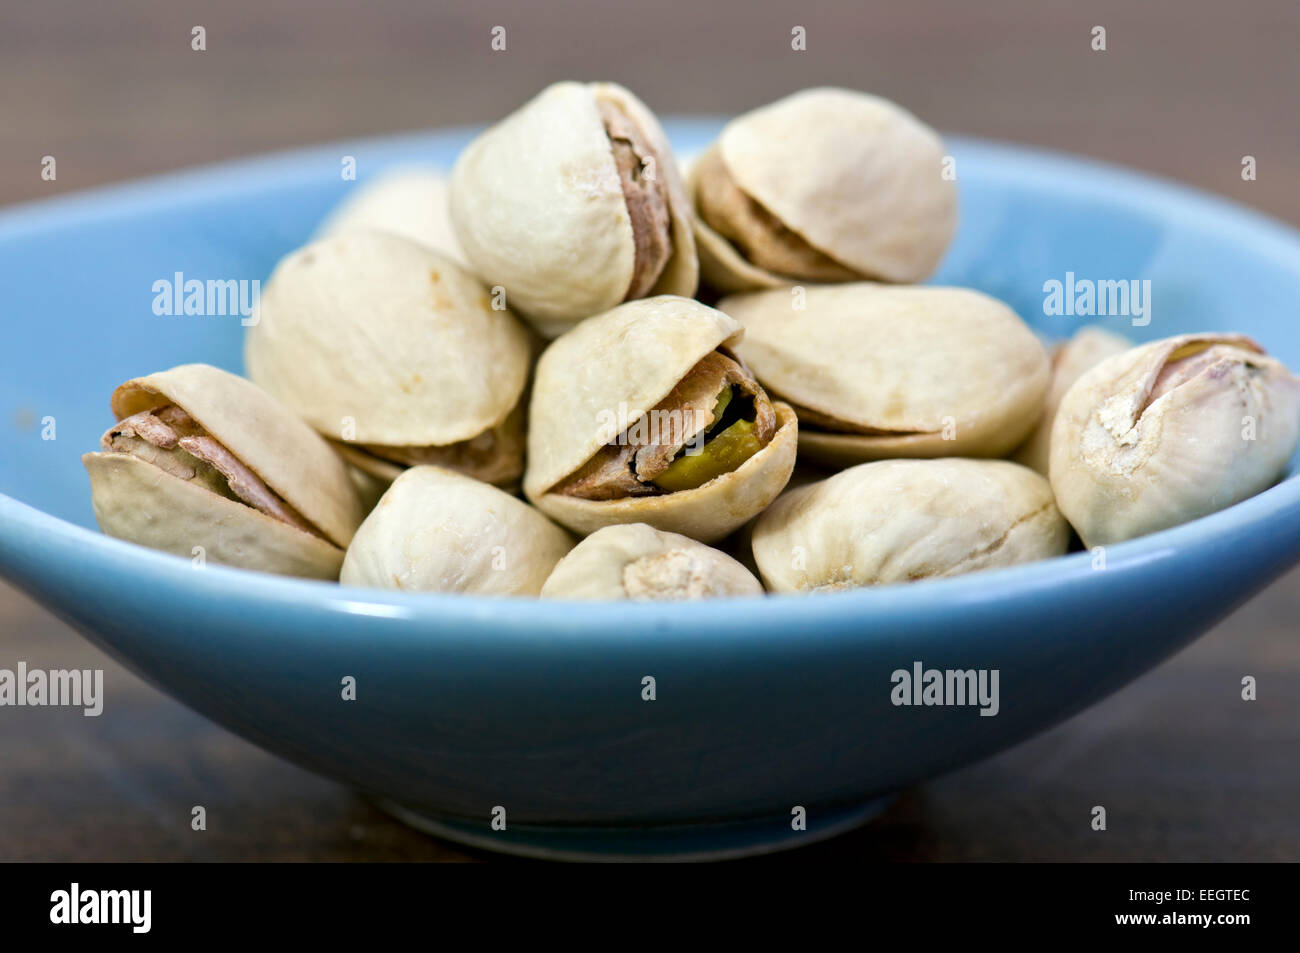 Small blue bowl of pistachio nuts on dark background Stock Photo